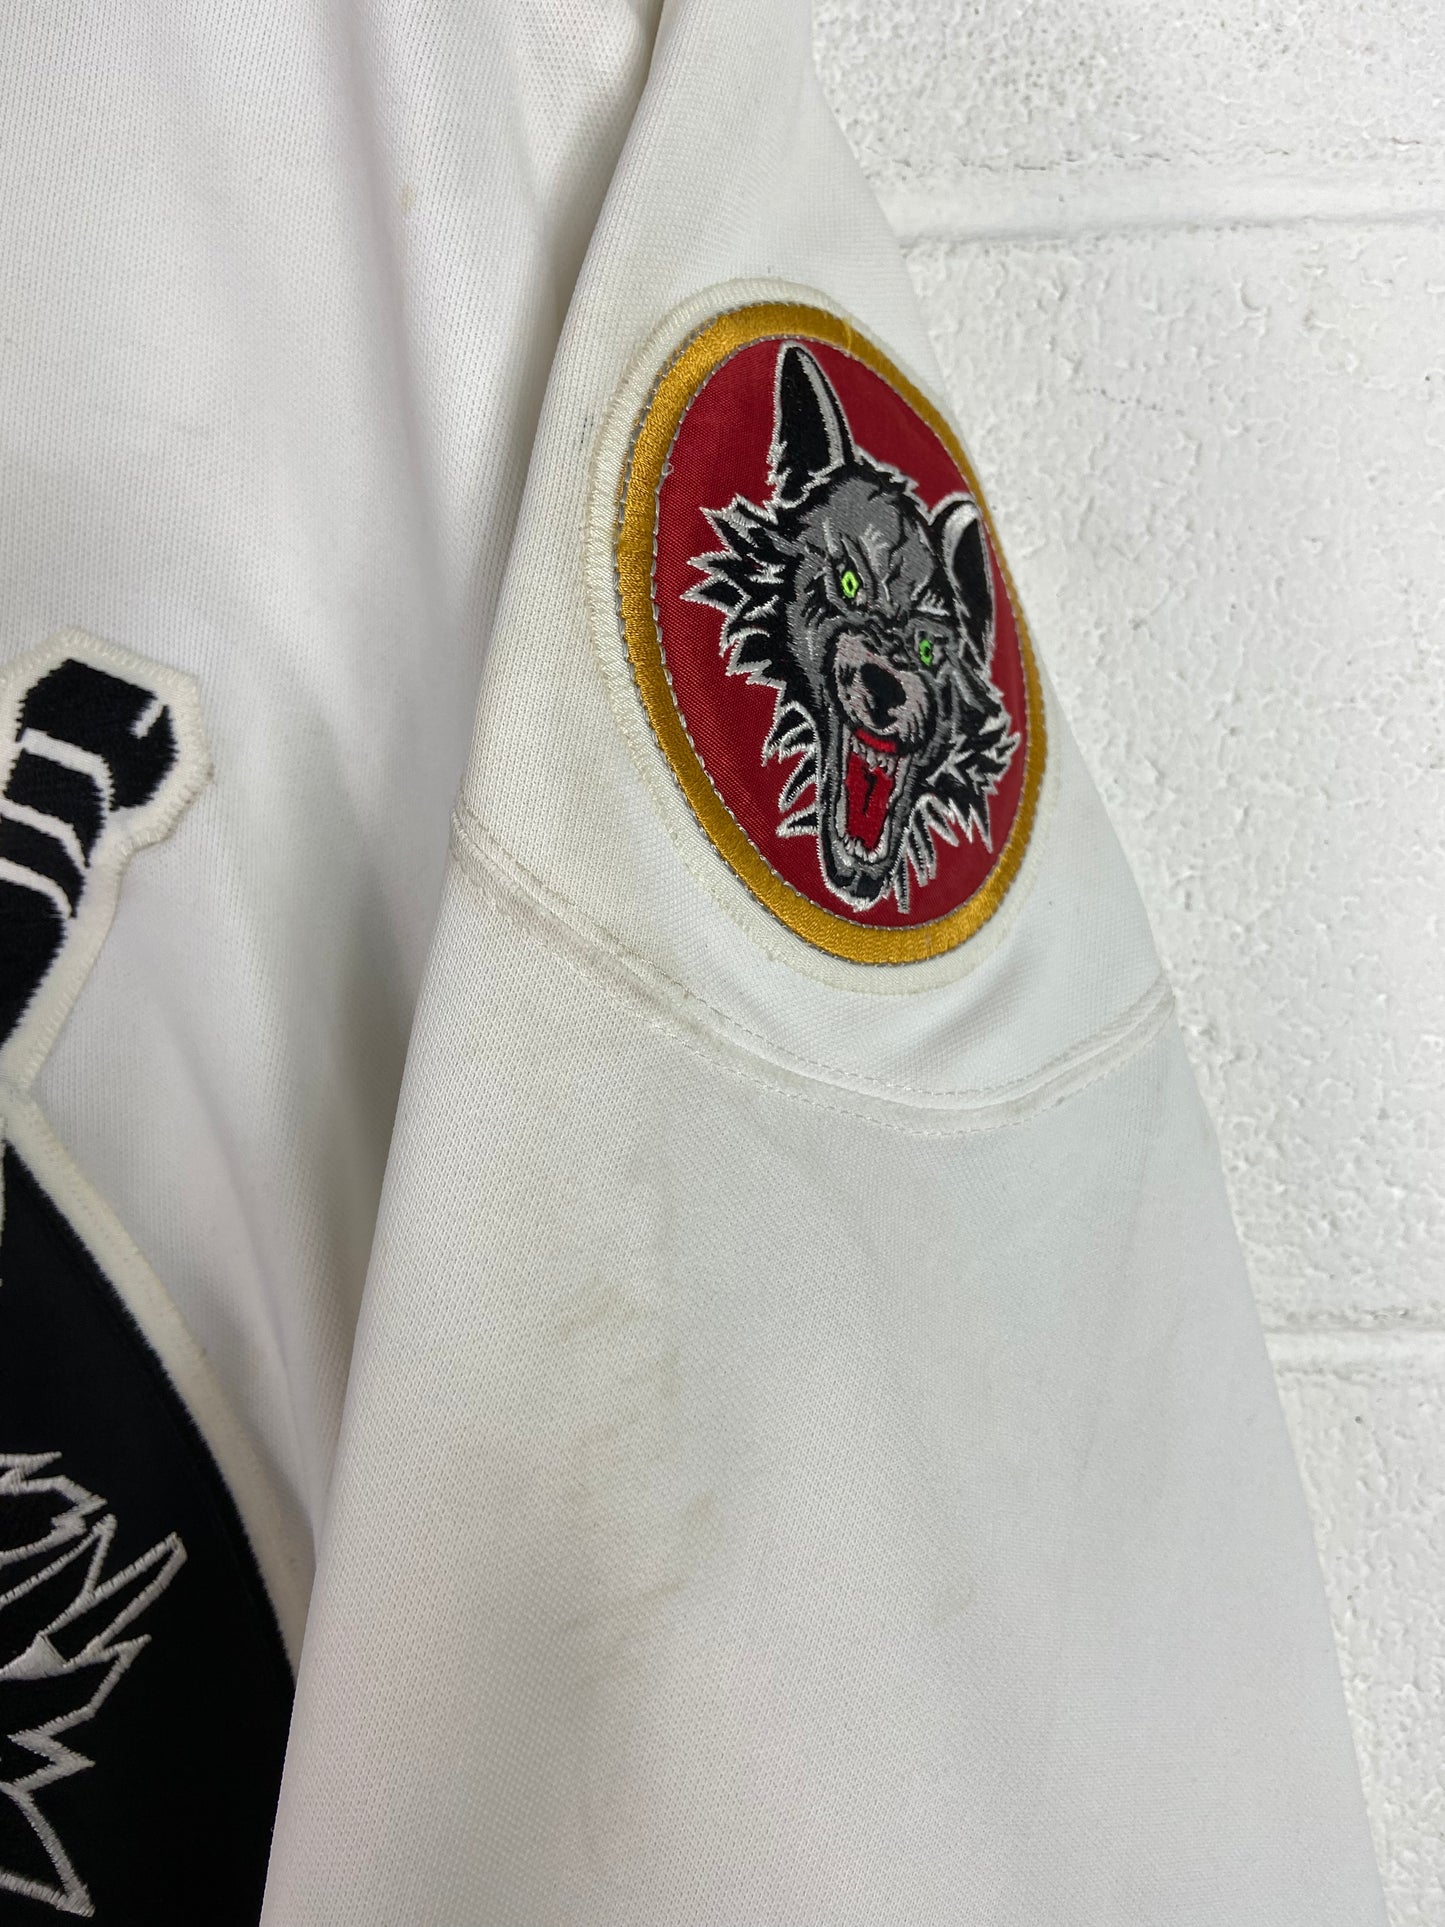 VTG Chicago Wolves Inaugural Authentic Bauer AHL Hockey Jersey Sz XXL